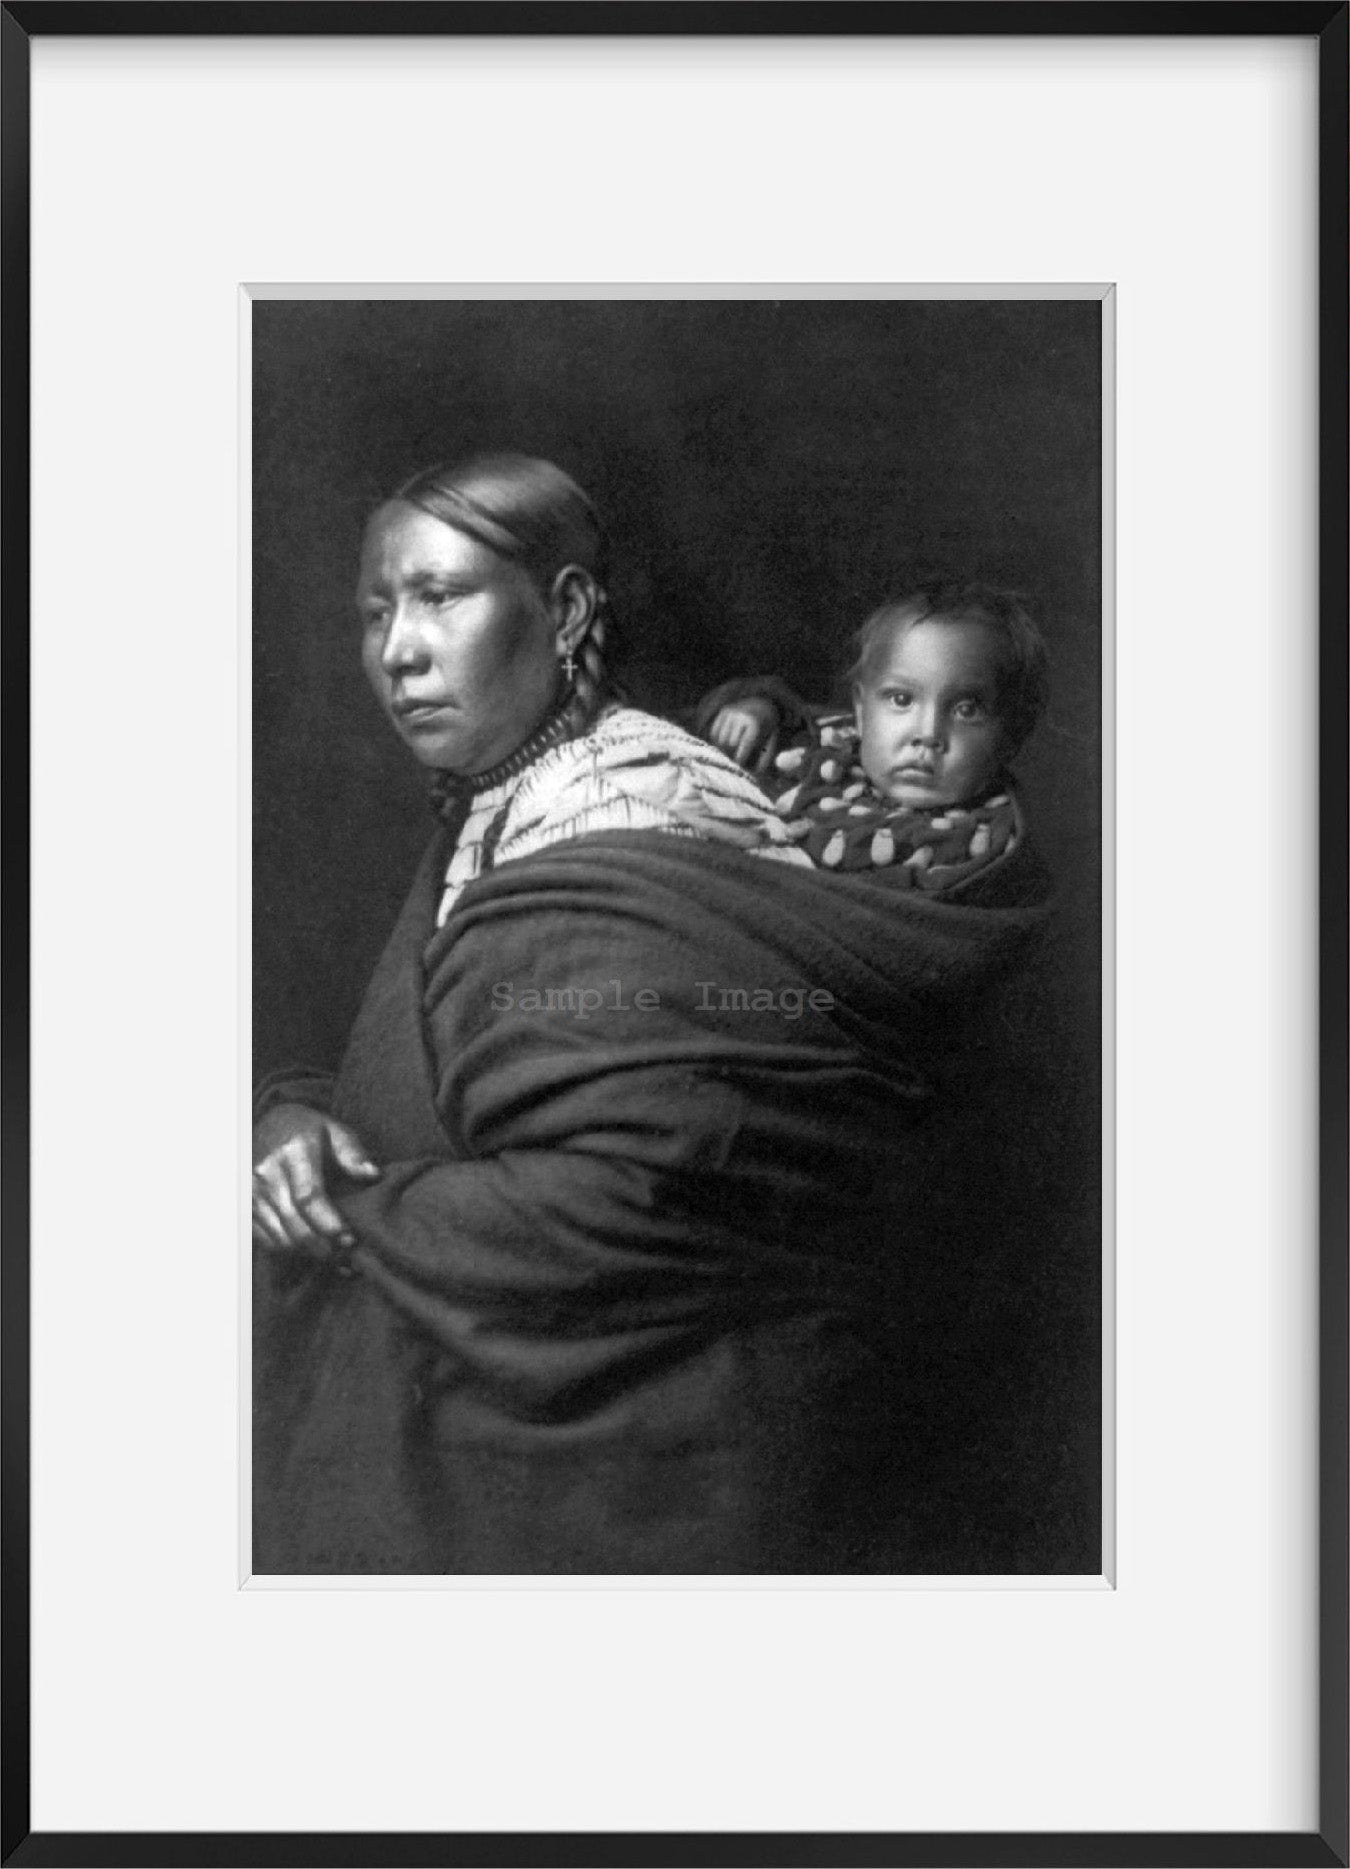 Photograph of Mother and Child Summary: Teton Sioux squaw and papoose.